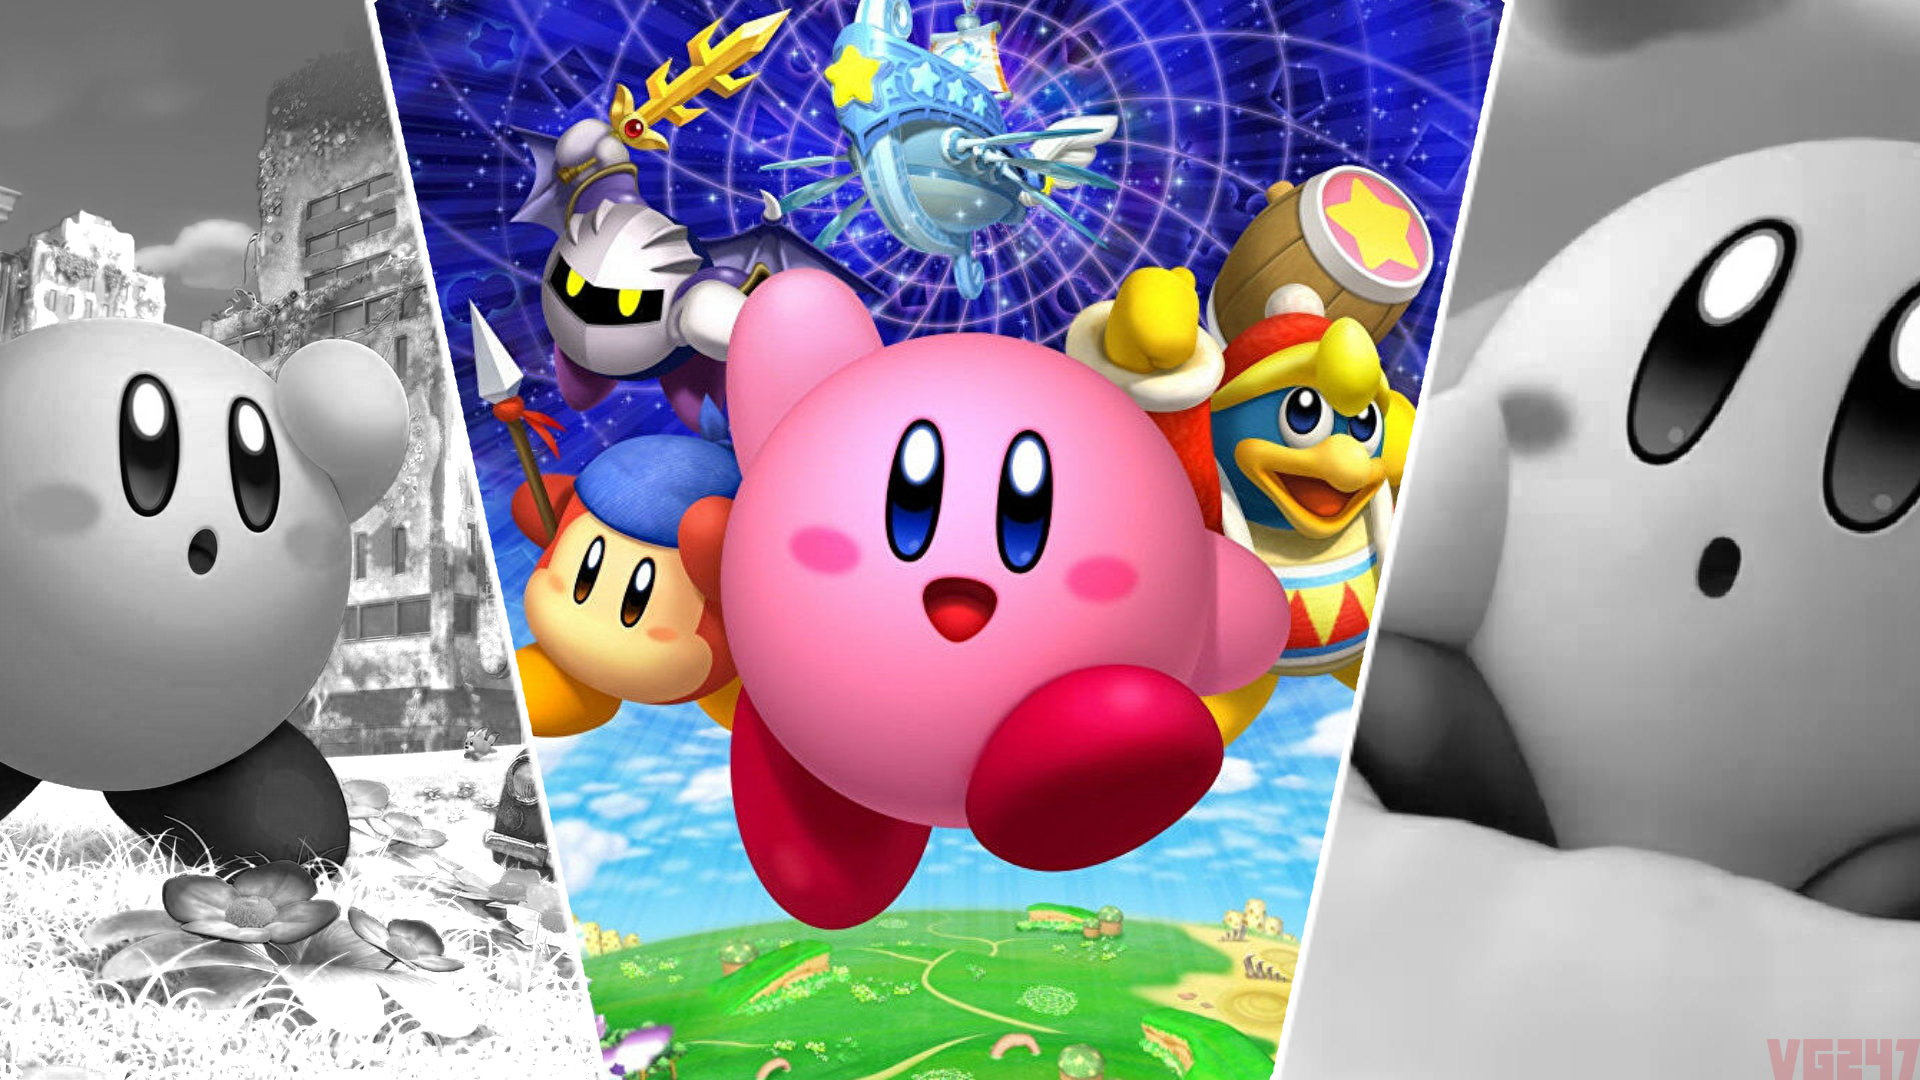 kirbys return to dream land deluxe review